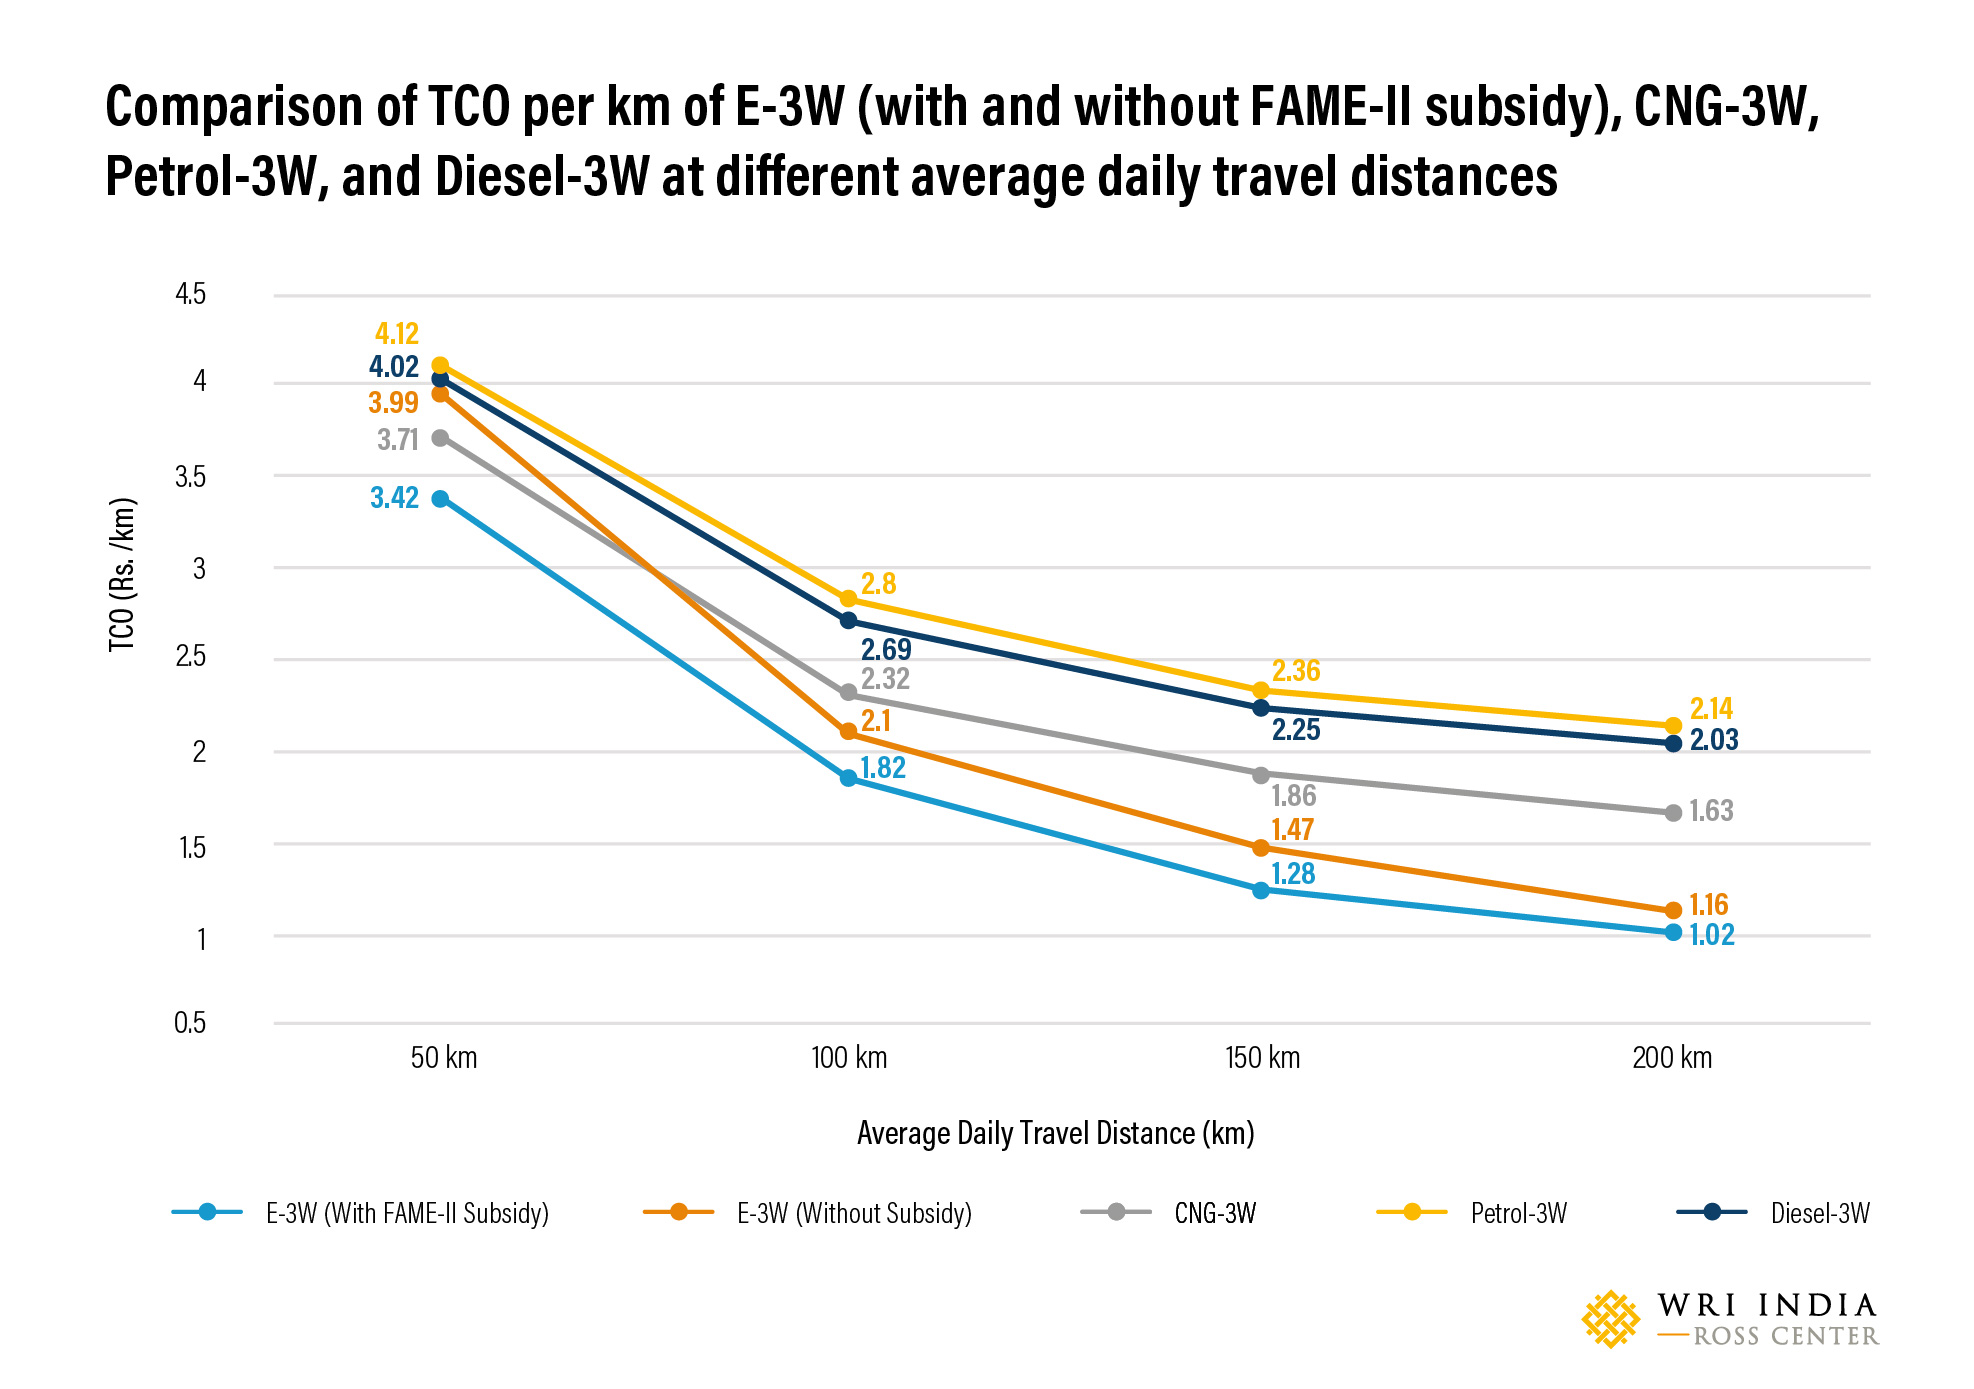 Comparison of TCO per km of e-3W (with and without FAME-II subsidy), CNG-3W, Petrol-3W, and Diesel-3W at different average daily travel distances.